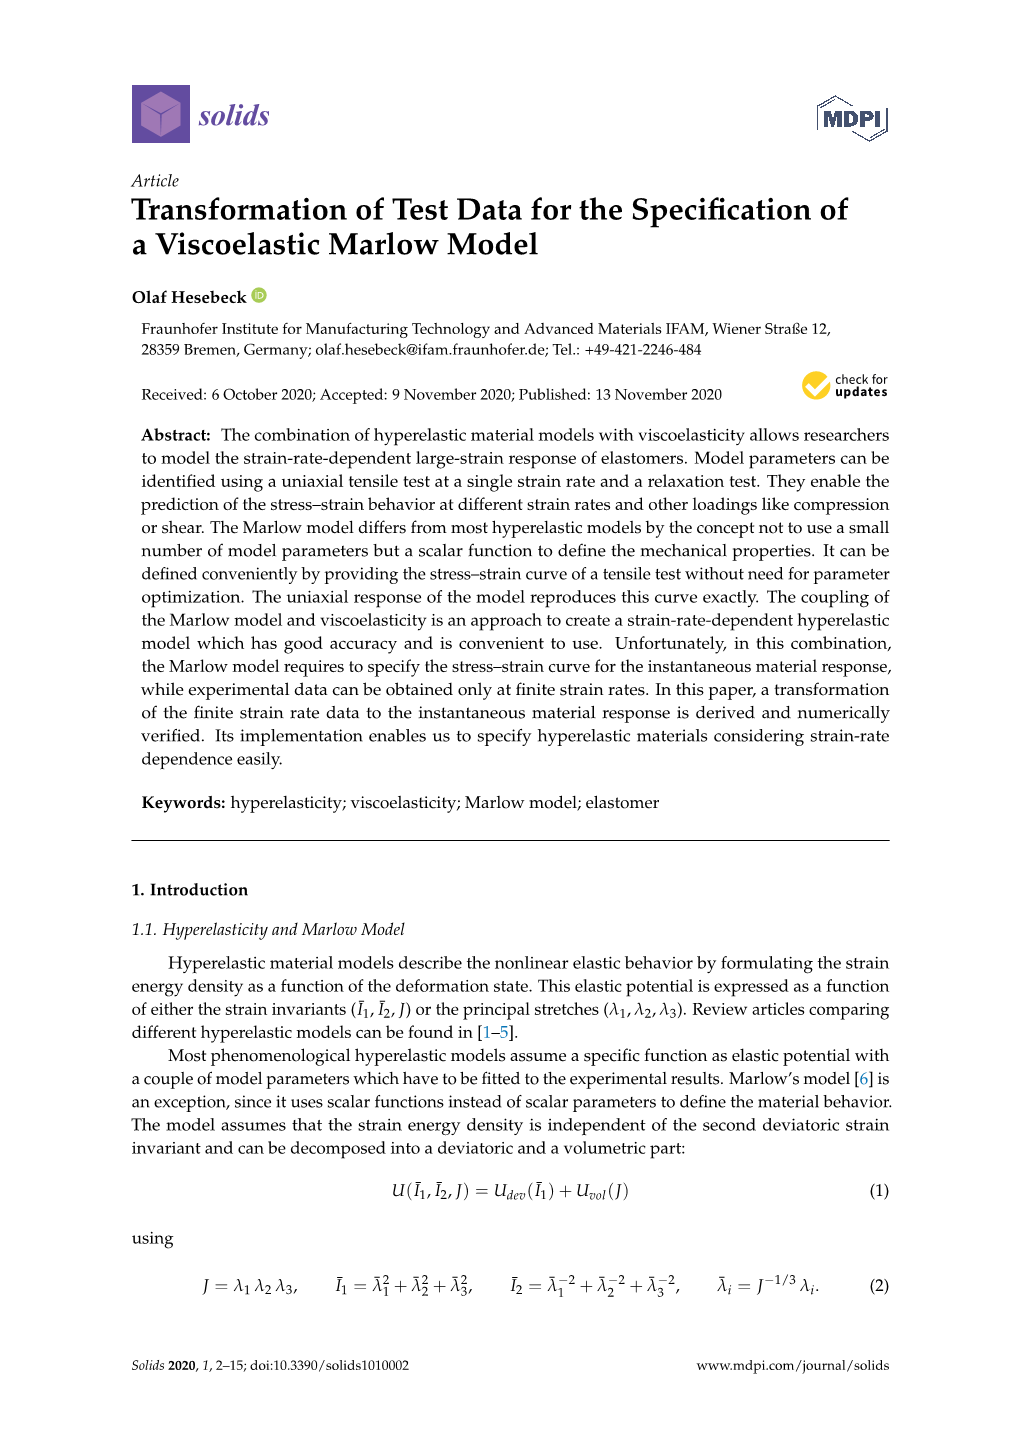 Transformation of Test Data for the Specification of a Viscoelastic